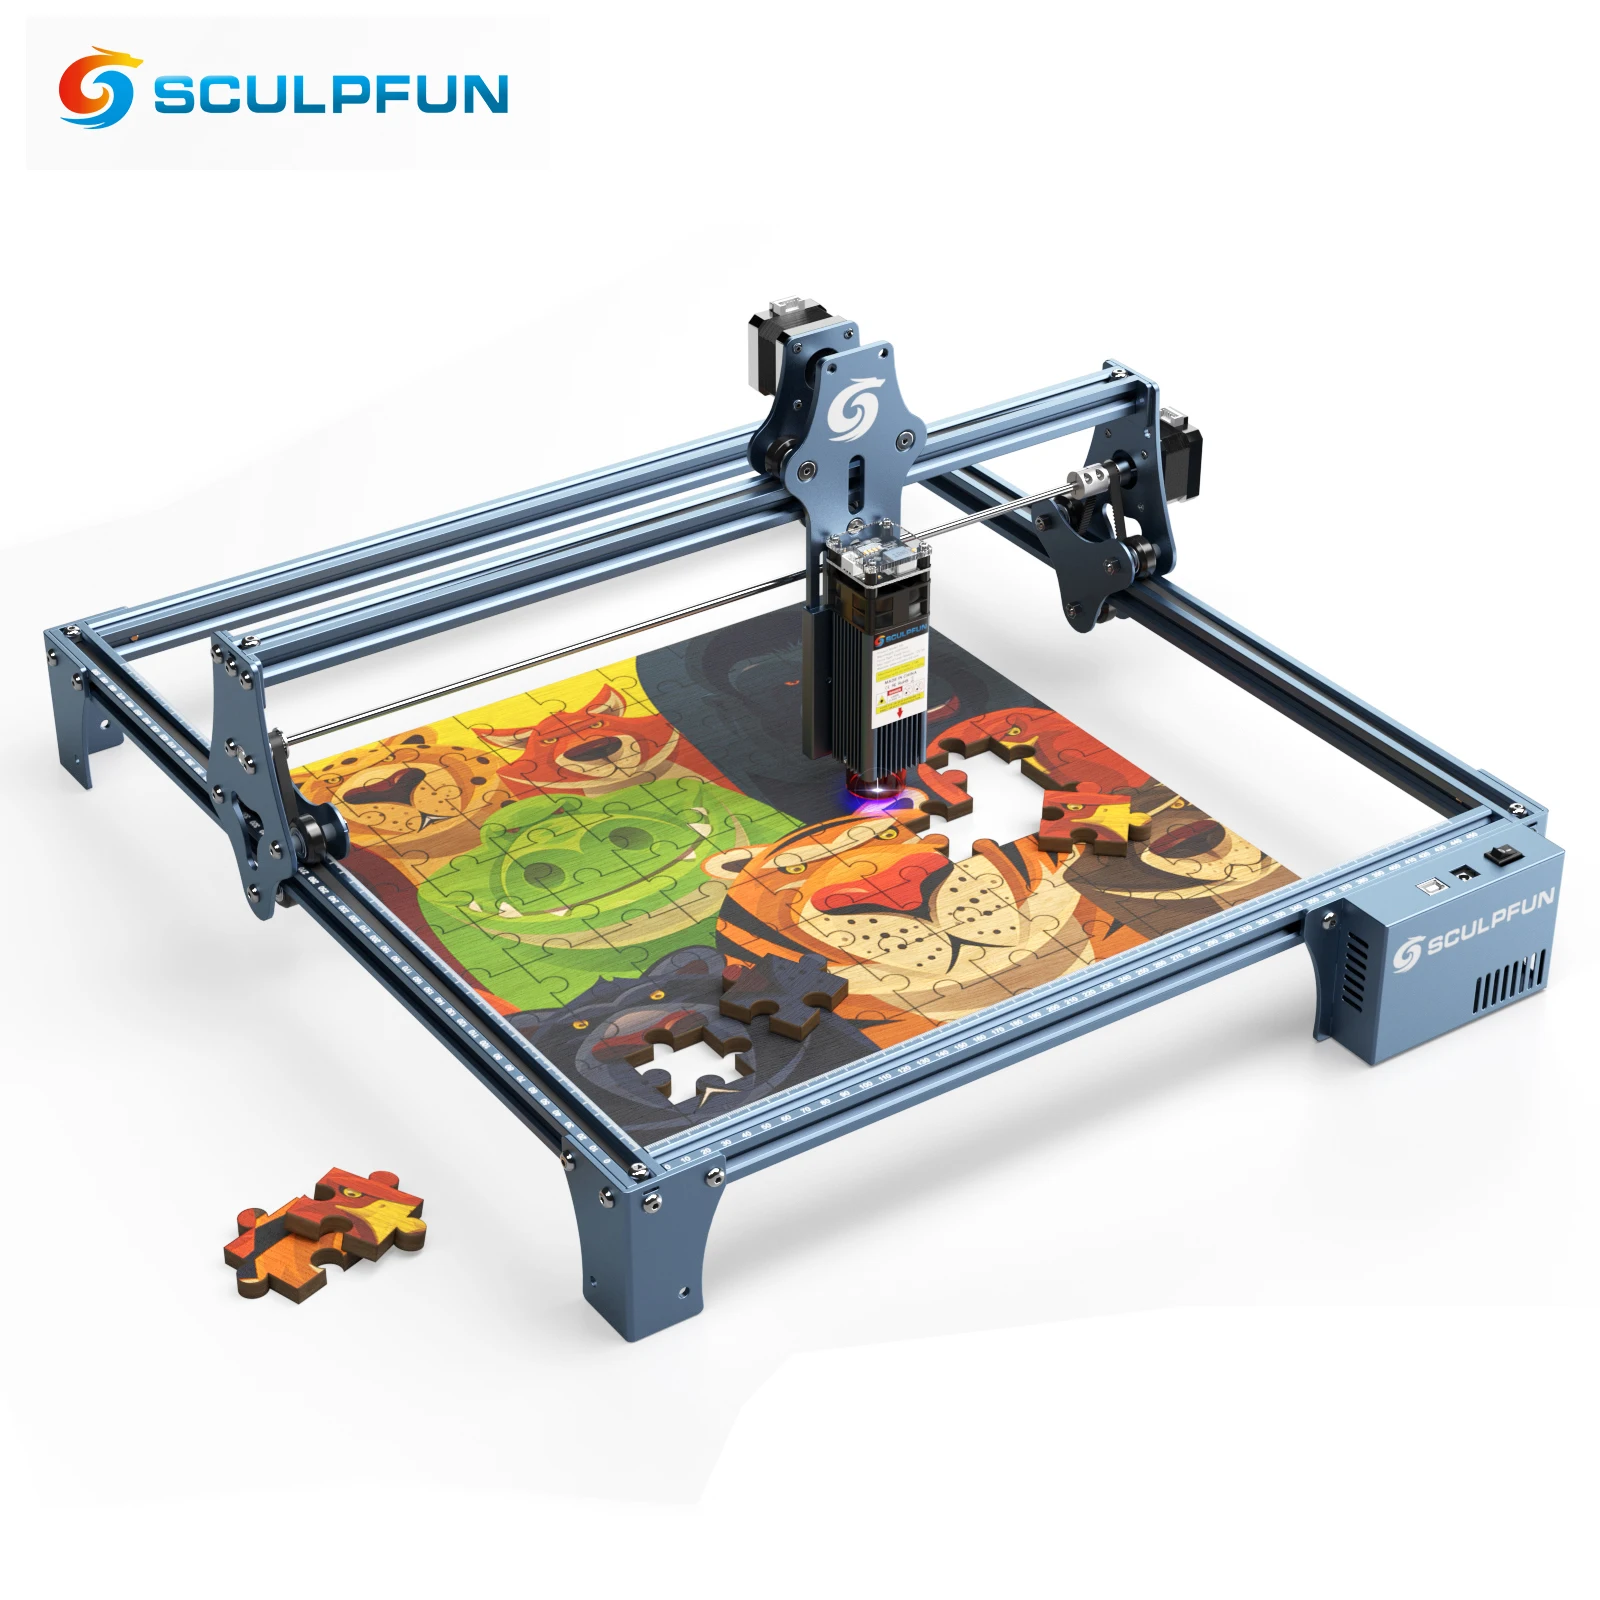  SCULPFUN S9 Laser Engraver - Laser Engraving Machine for Wood,  Acrylic, Stainless Steel with 5.5W High Precision 0.06mm Ultra-Thin Beam  Diode Laser, Quick Assembly, Large Area 410x420mm